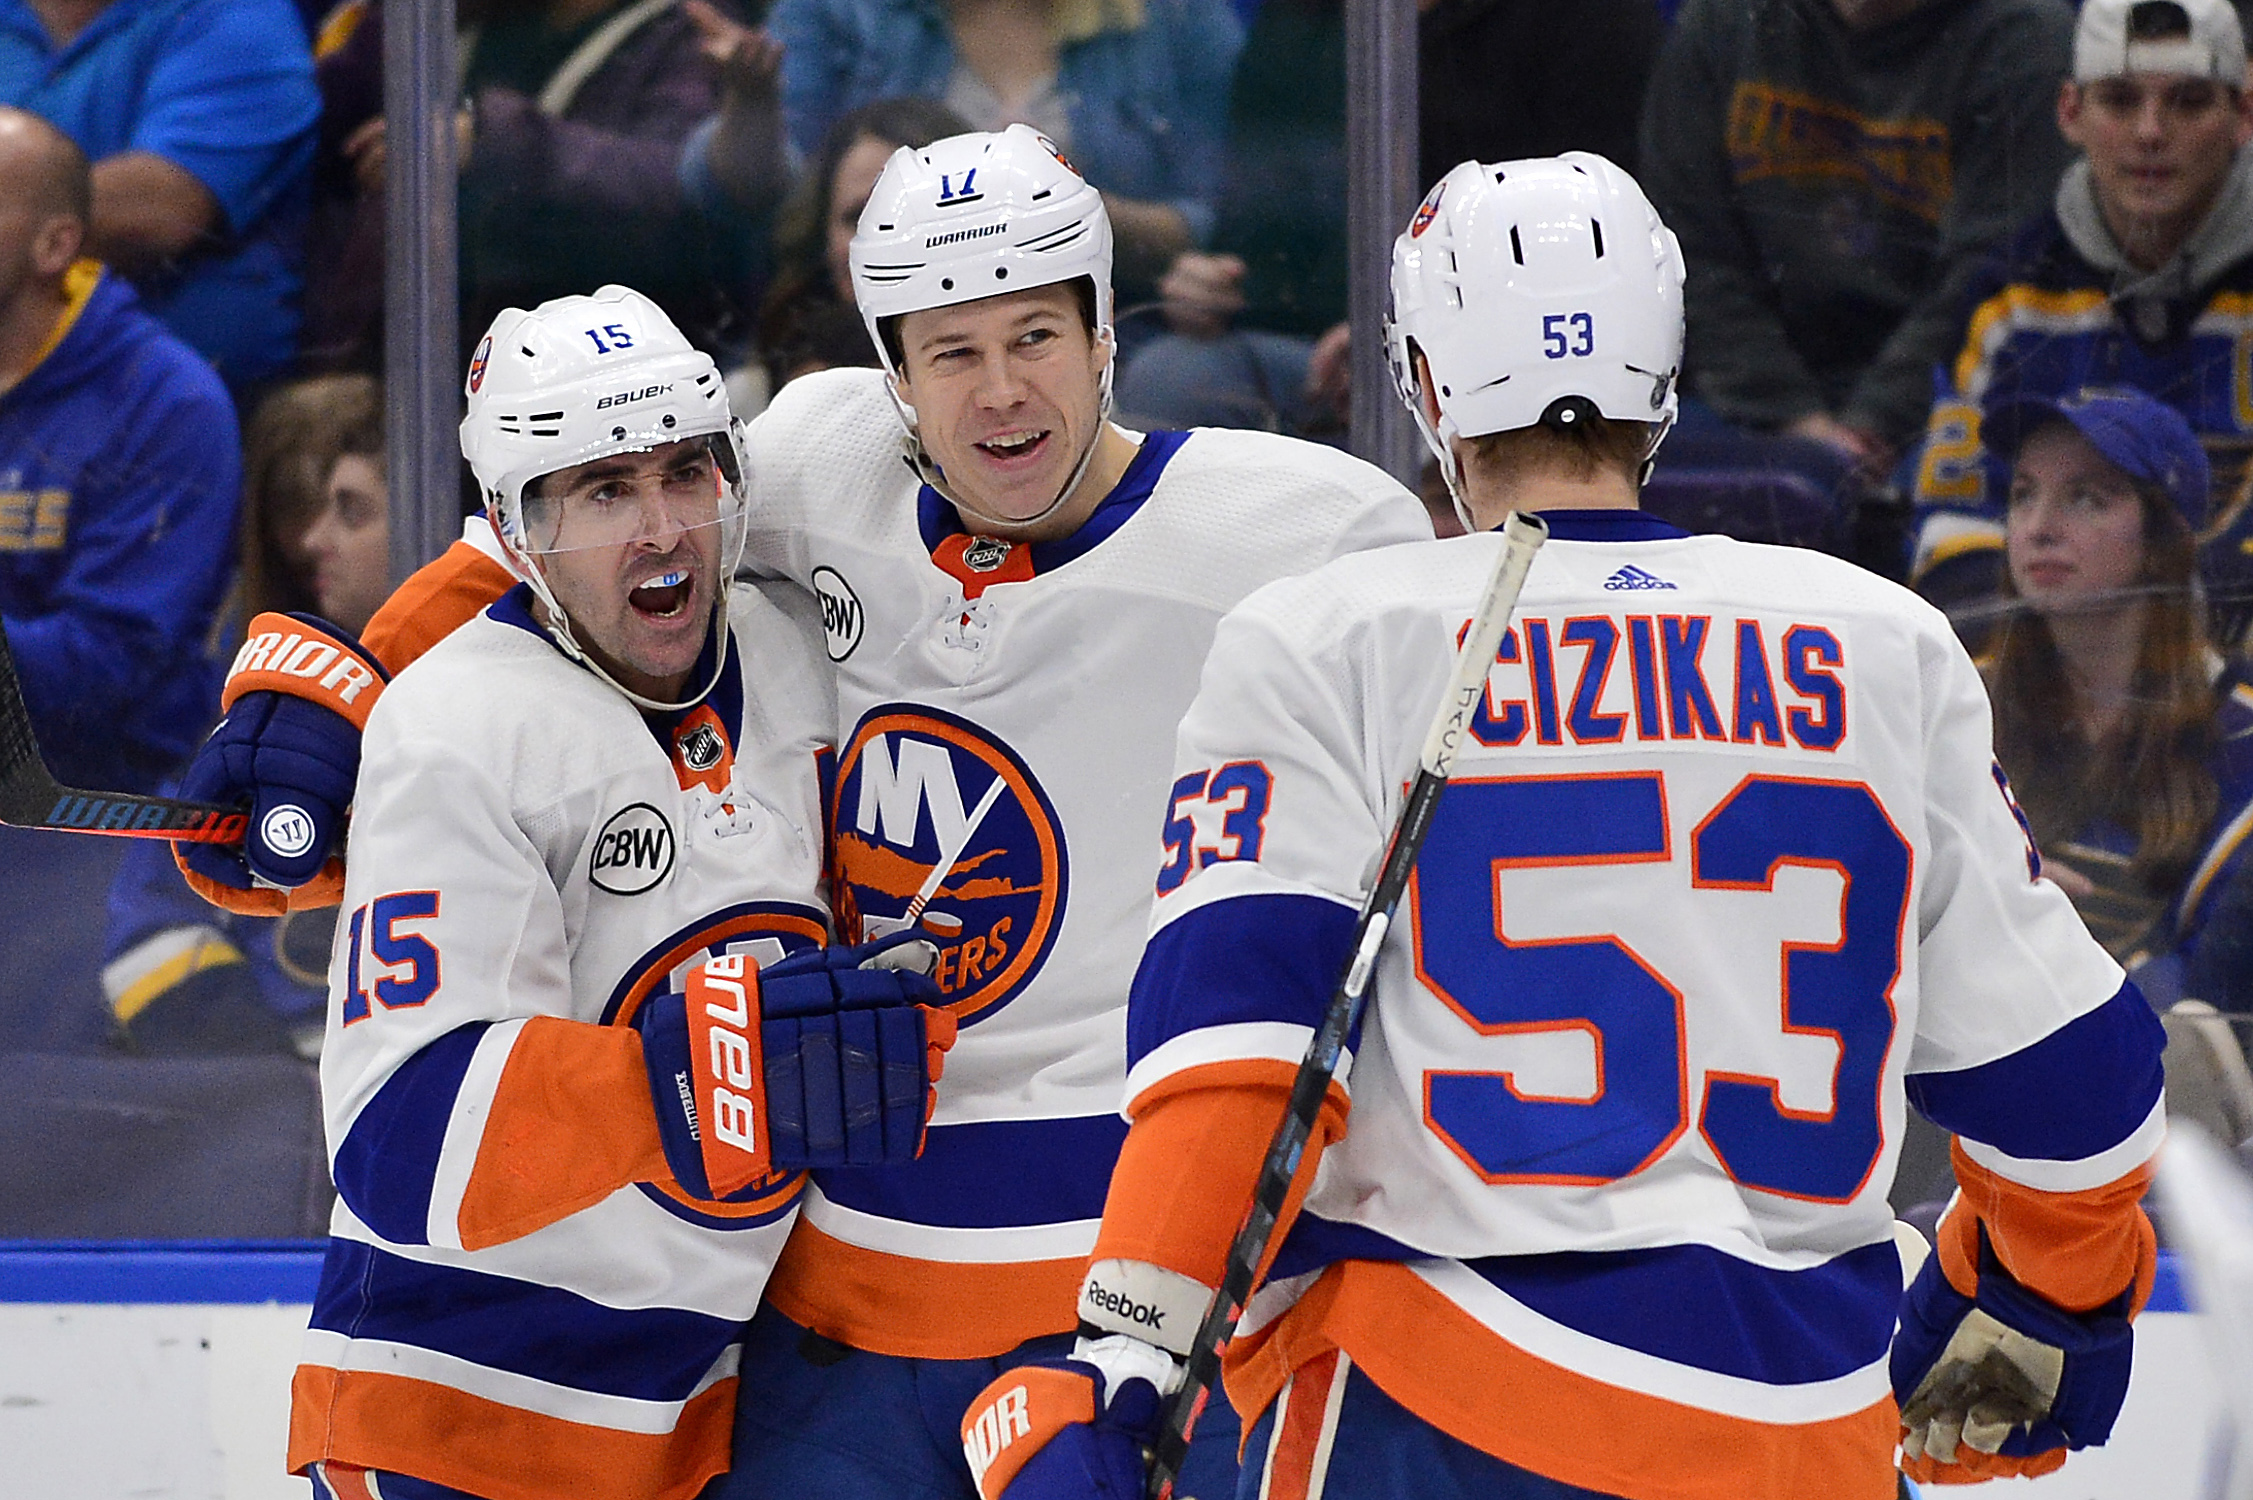 Jan 5, 2019; St. Louis, MO, USA; New York Islanders left wing Matt Martin (17) is congratulated by right wing Cal Clutterbuck (15) and center Casey Cizikas (53) after scoring during the second period against the St. Louis Blues at Enterprise Center. Mandatory Credit: Jeff Curry-USA TODAY Sports